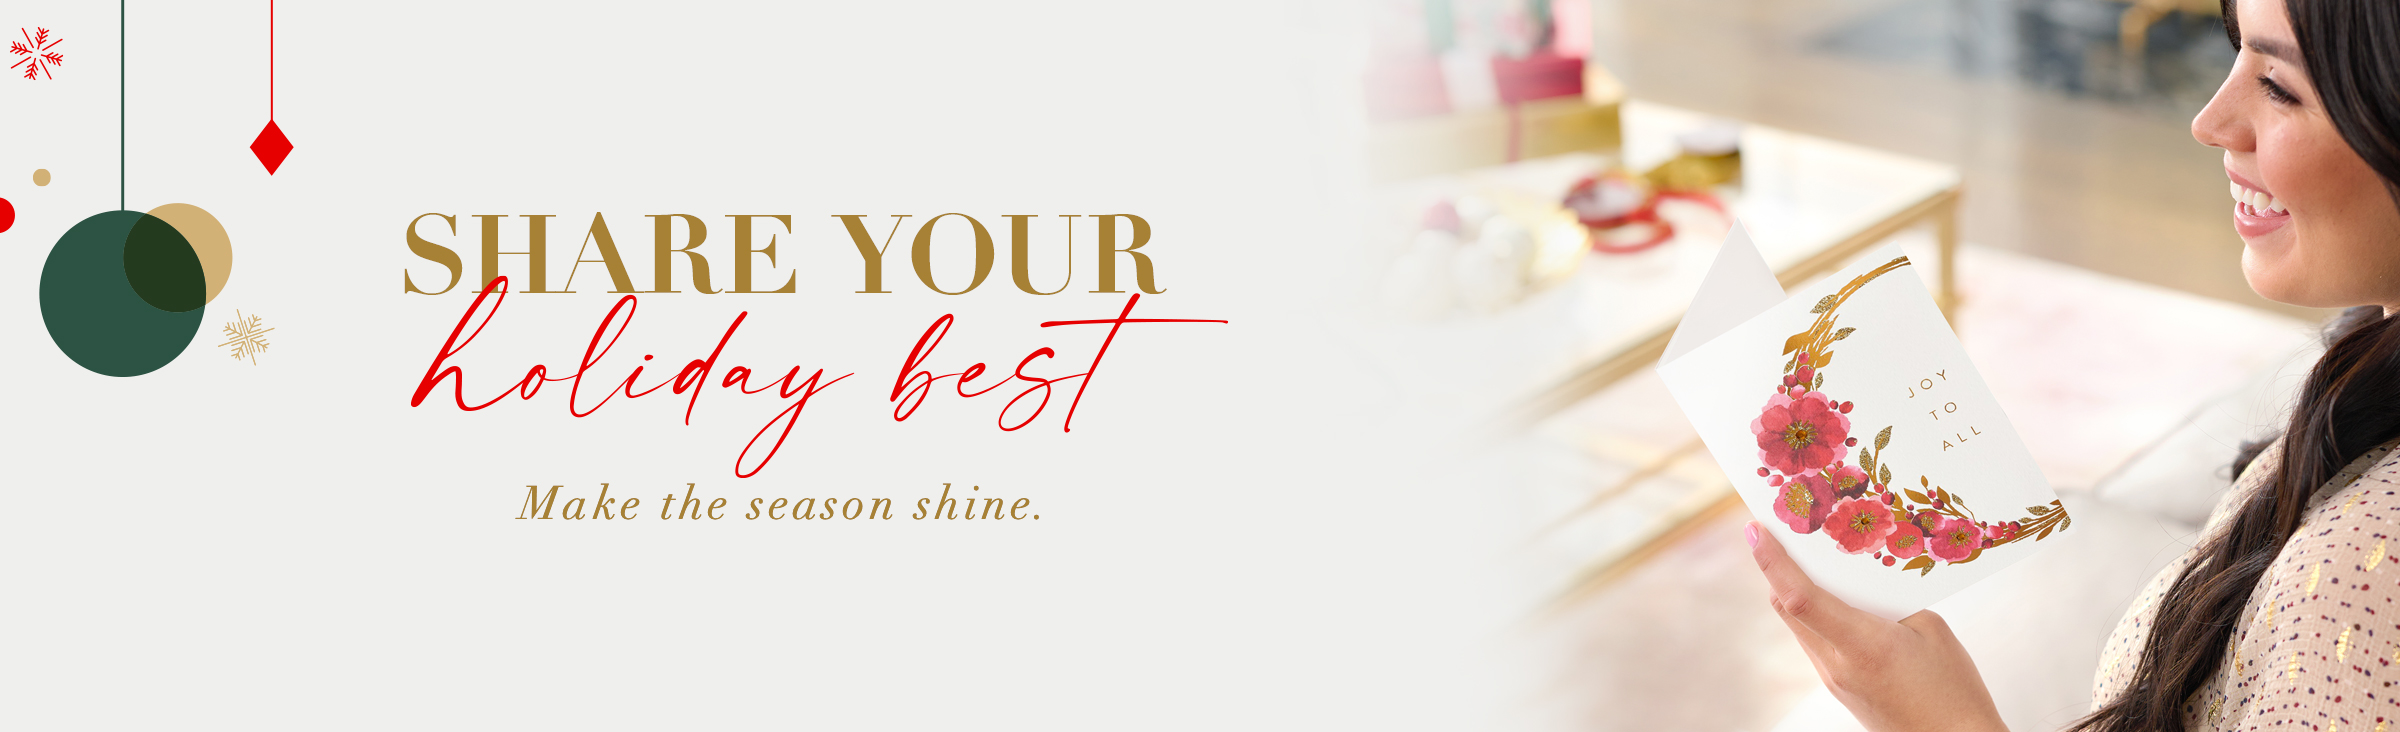 Share Your Holiday Best Make the season shine.